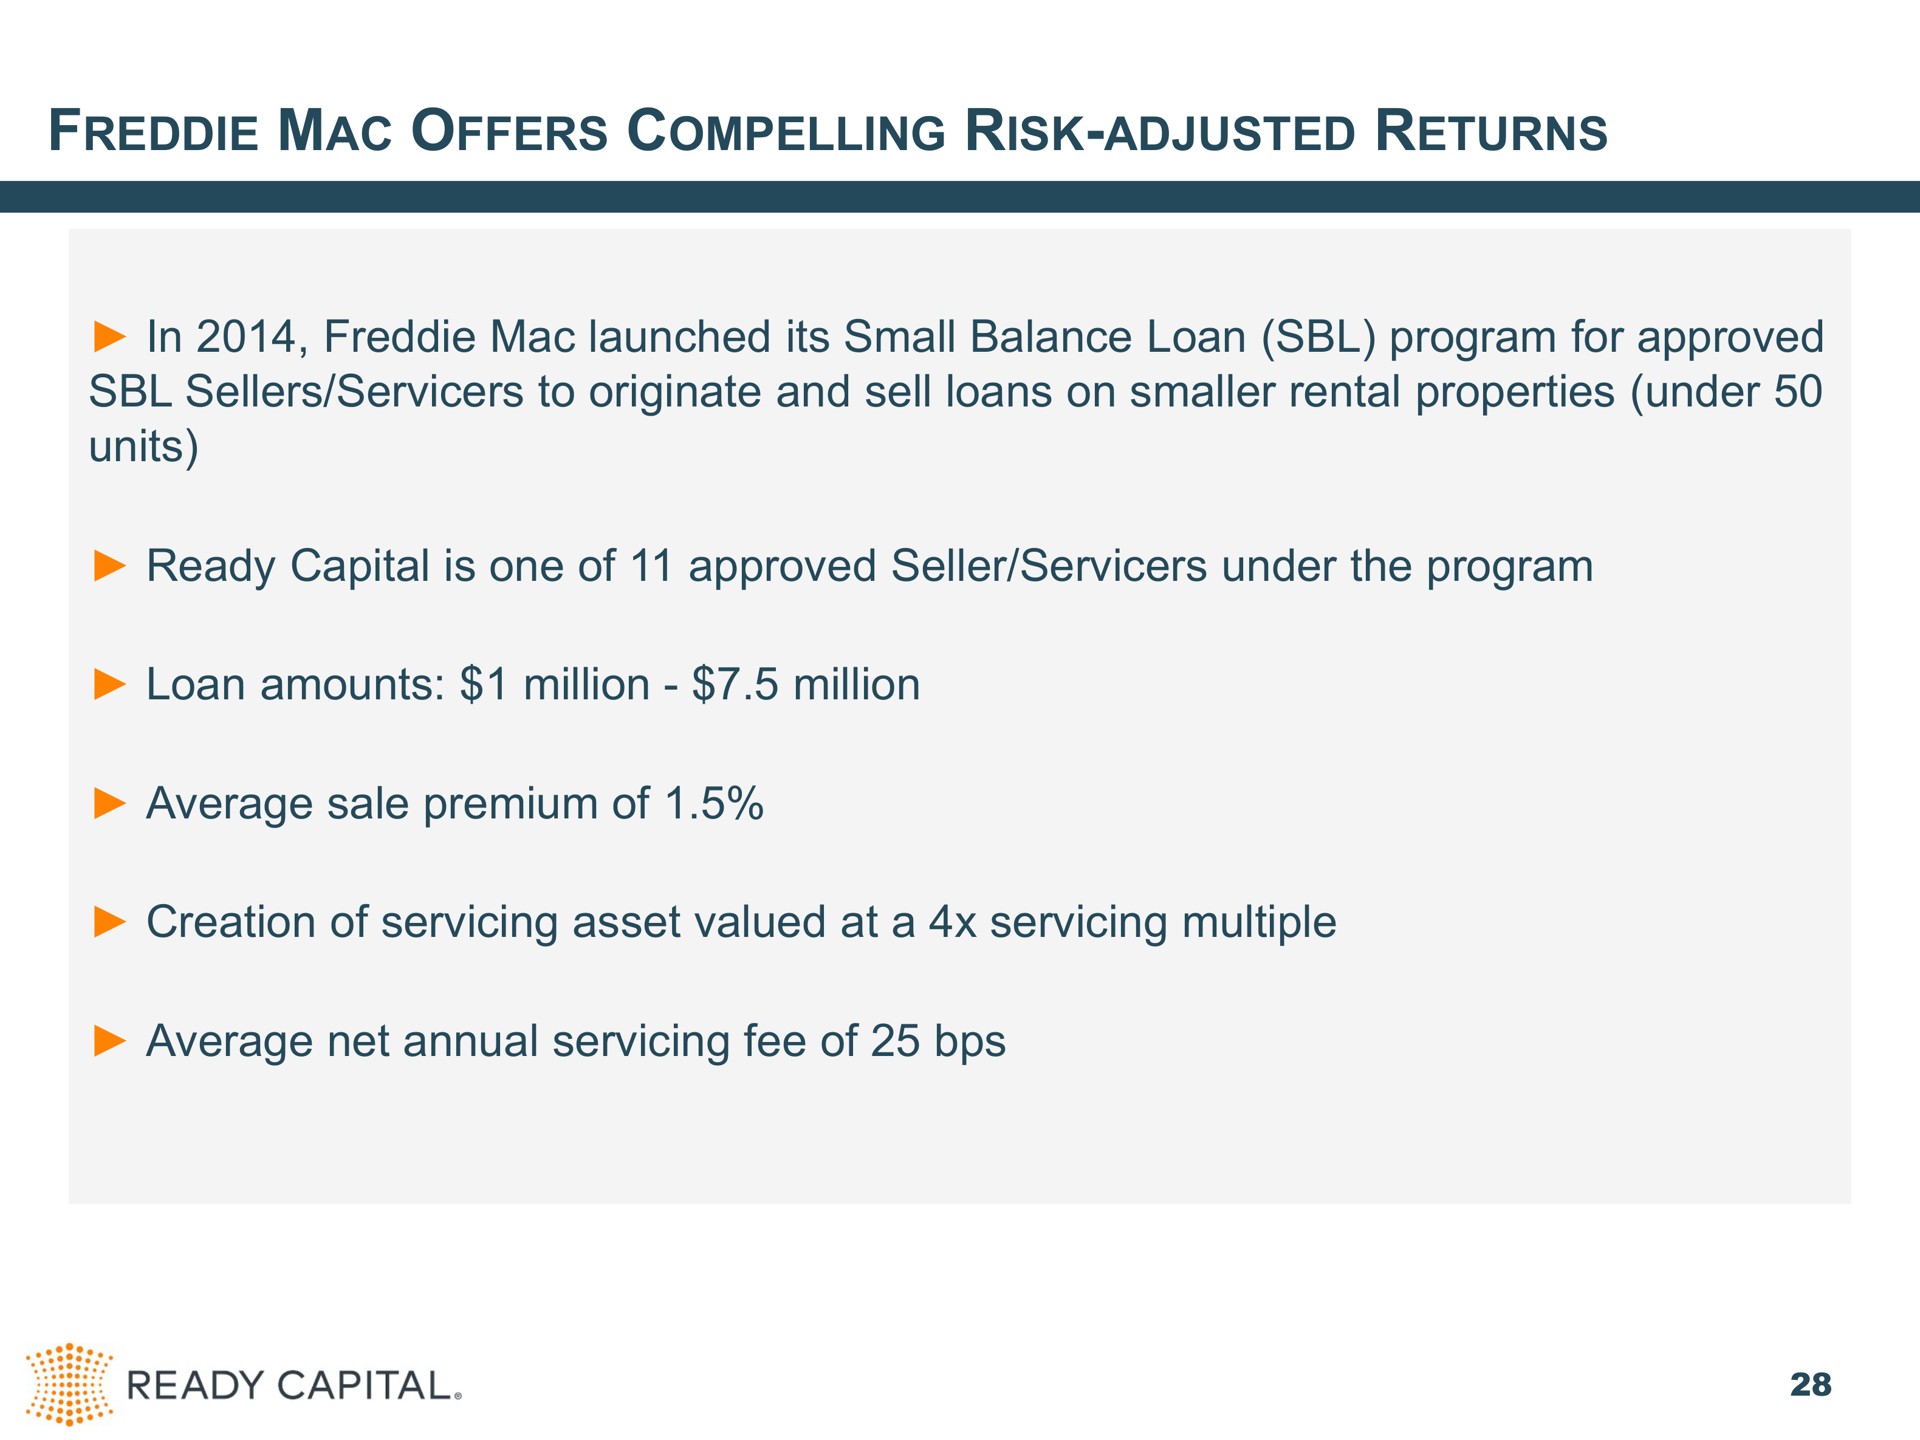 mac offers compelling risk adjusted returns in mac launched its small balance loan program for approved sellers to originate and sell loans on smaller rental properties under units ready capital is one of approved seller under the program loan amounts million million average sale premium of creation of servicing asset valued at a servicing multiple average net annual servicing fee of | Ready Capital